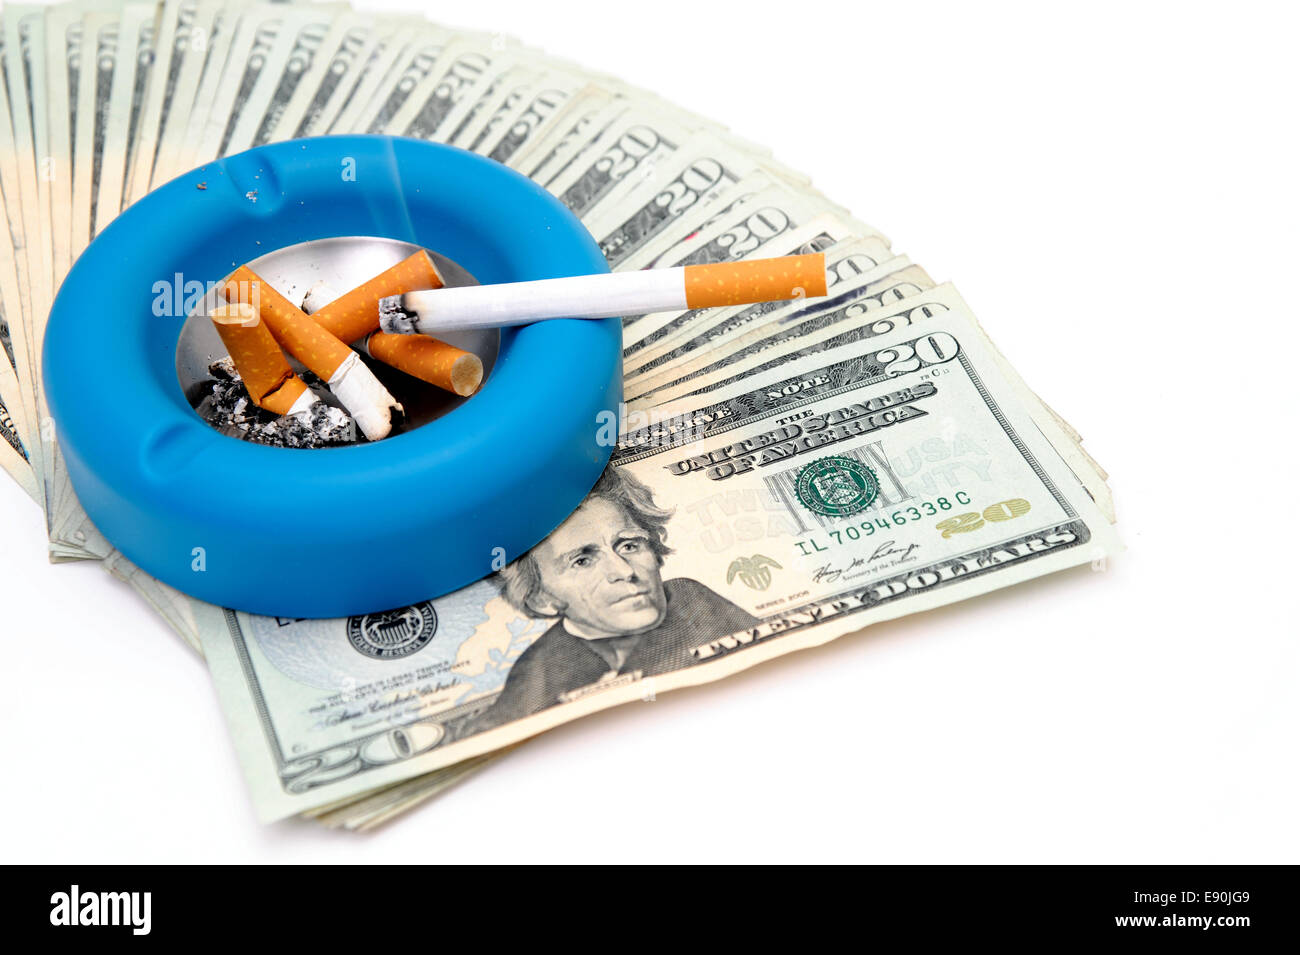 Cigarettes - Money Up In Smoke Stock Photo